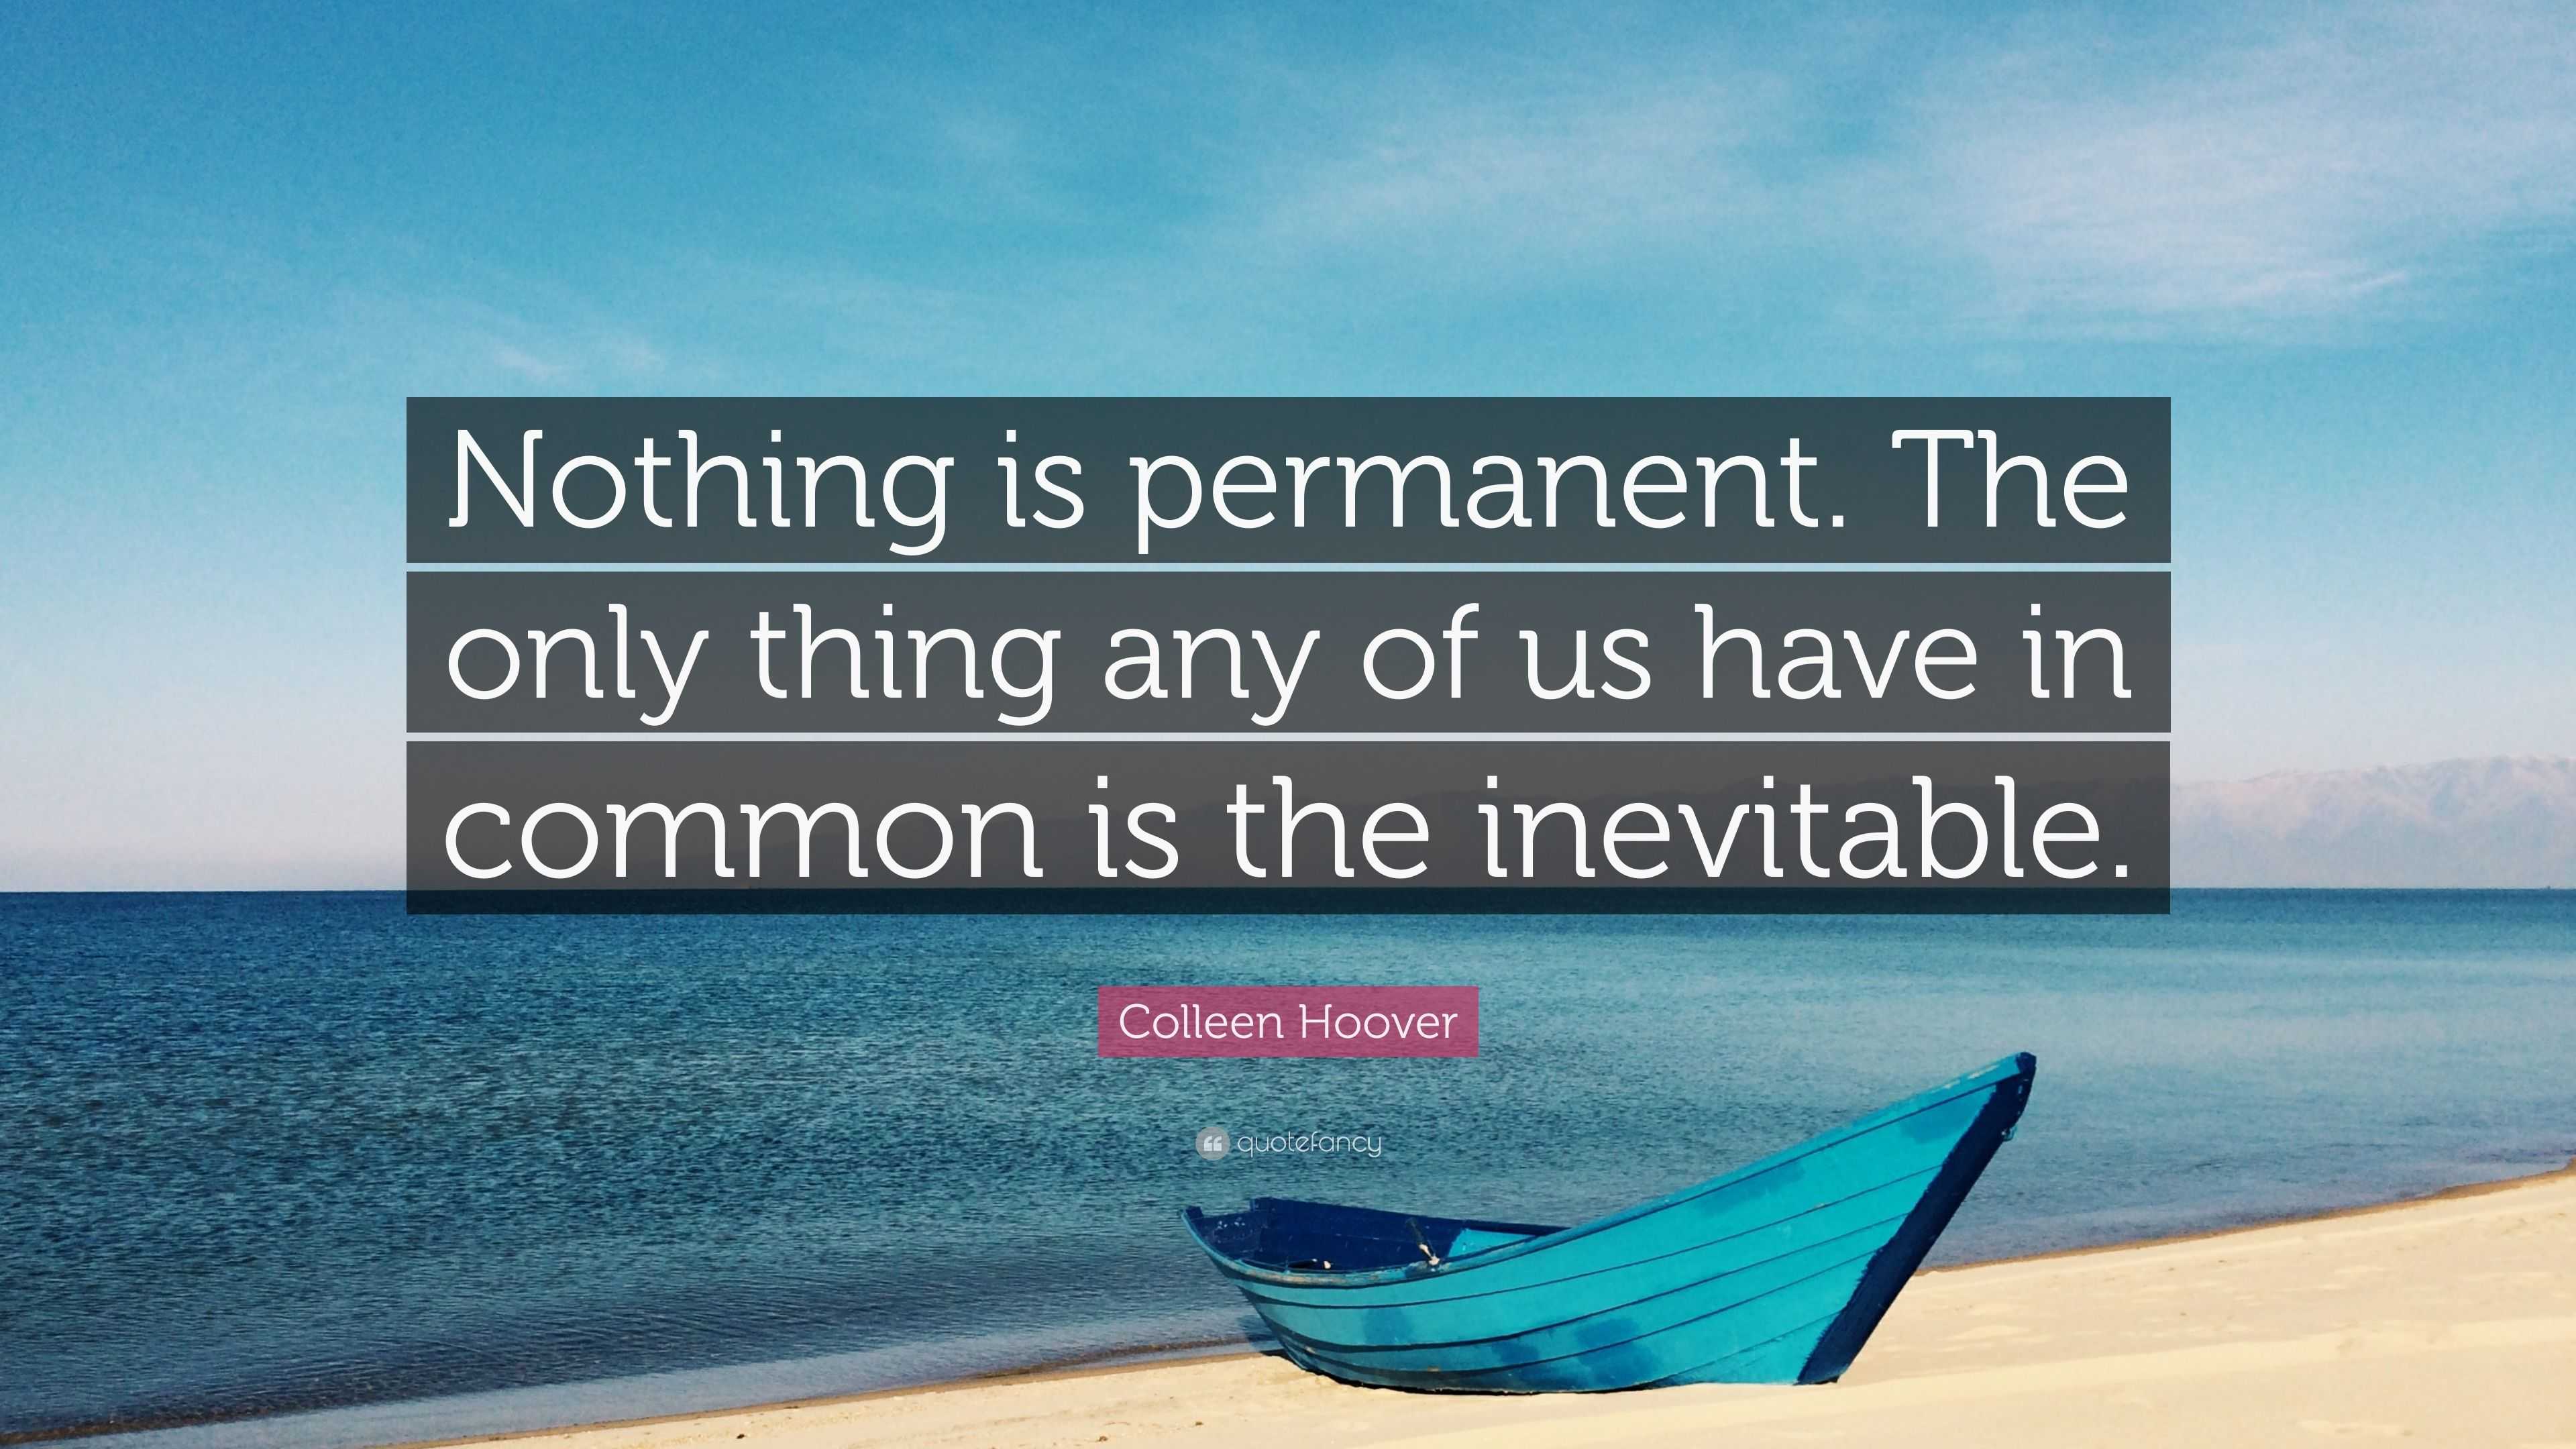 Colleen Hoover Quote: “Nothing is permanent. The only thing any of us ...